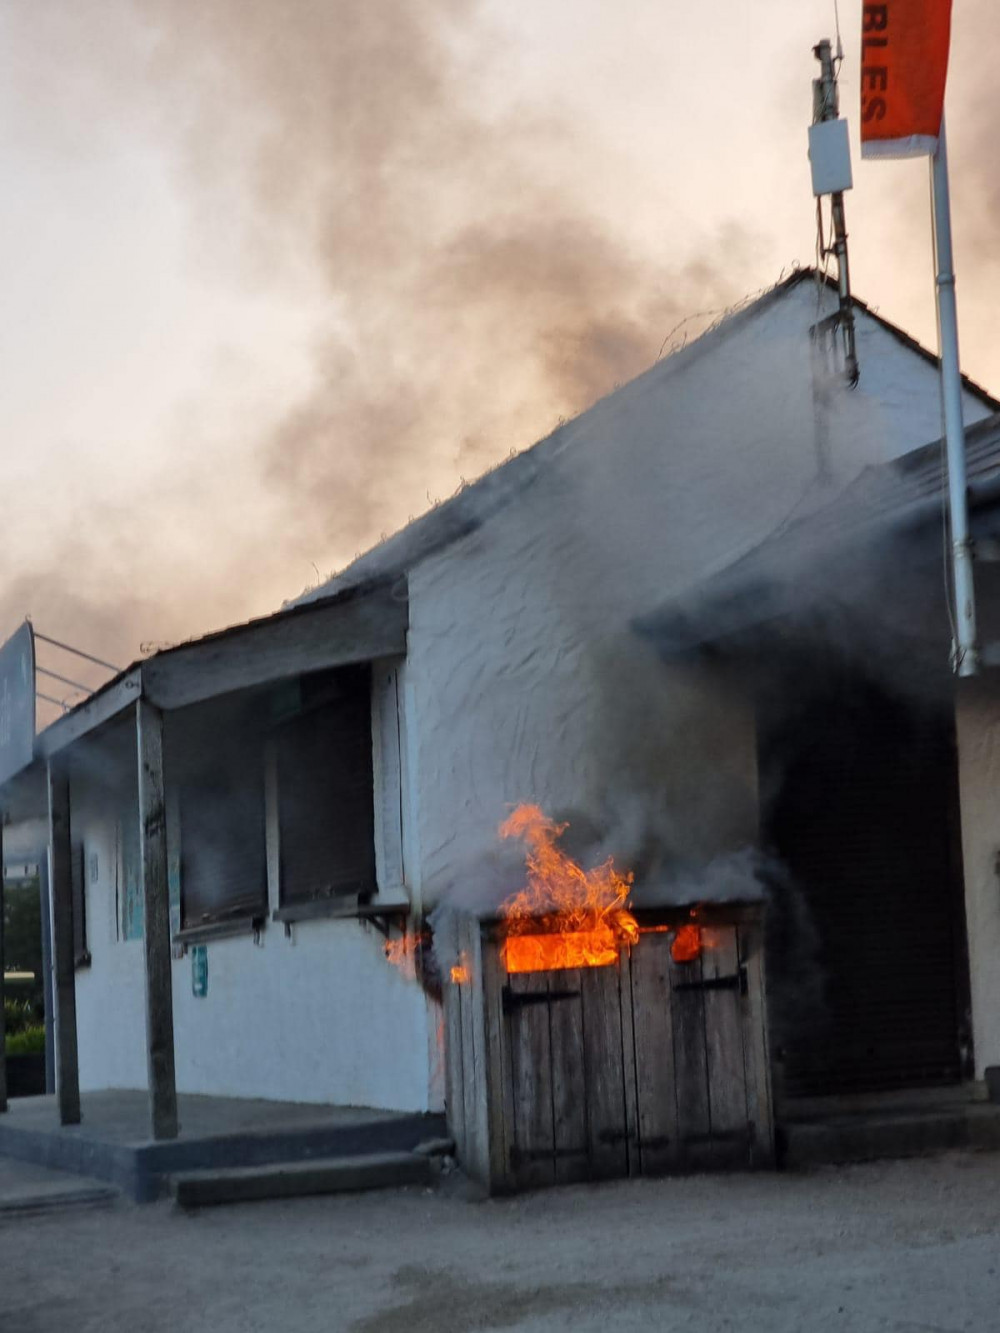 The fire came from inside the bin (Image: Swanpool Beach Cafe) 